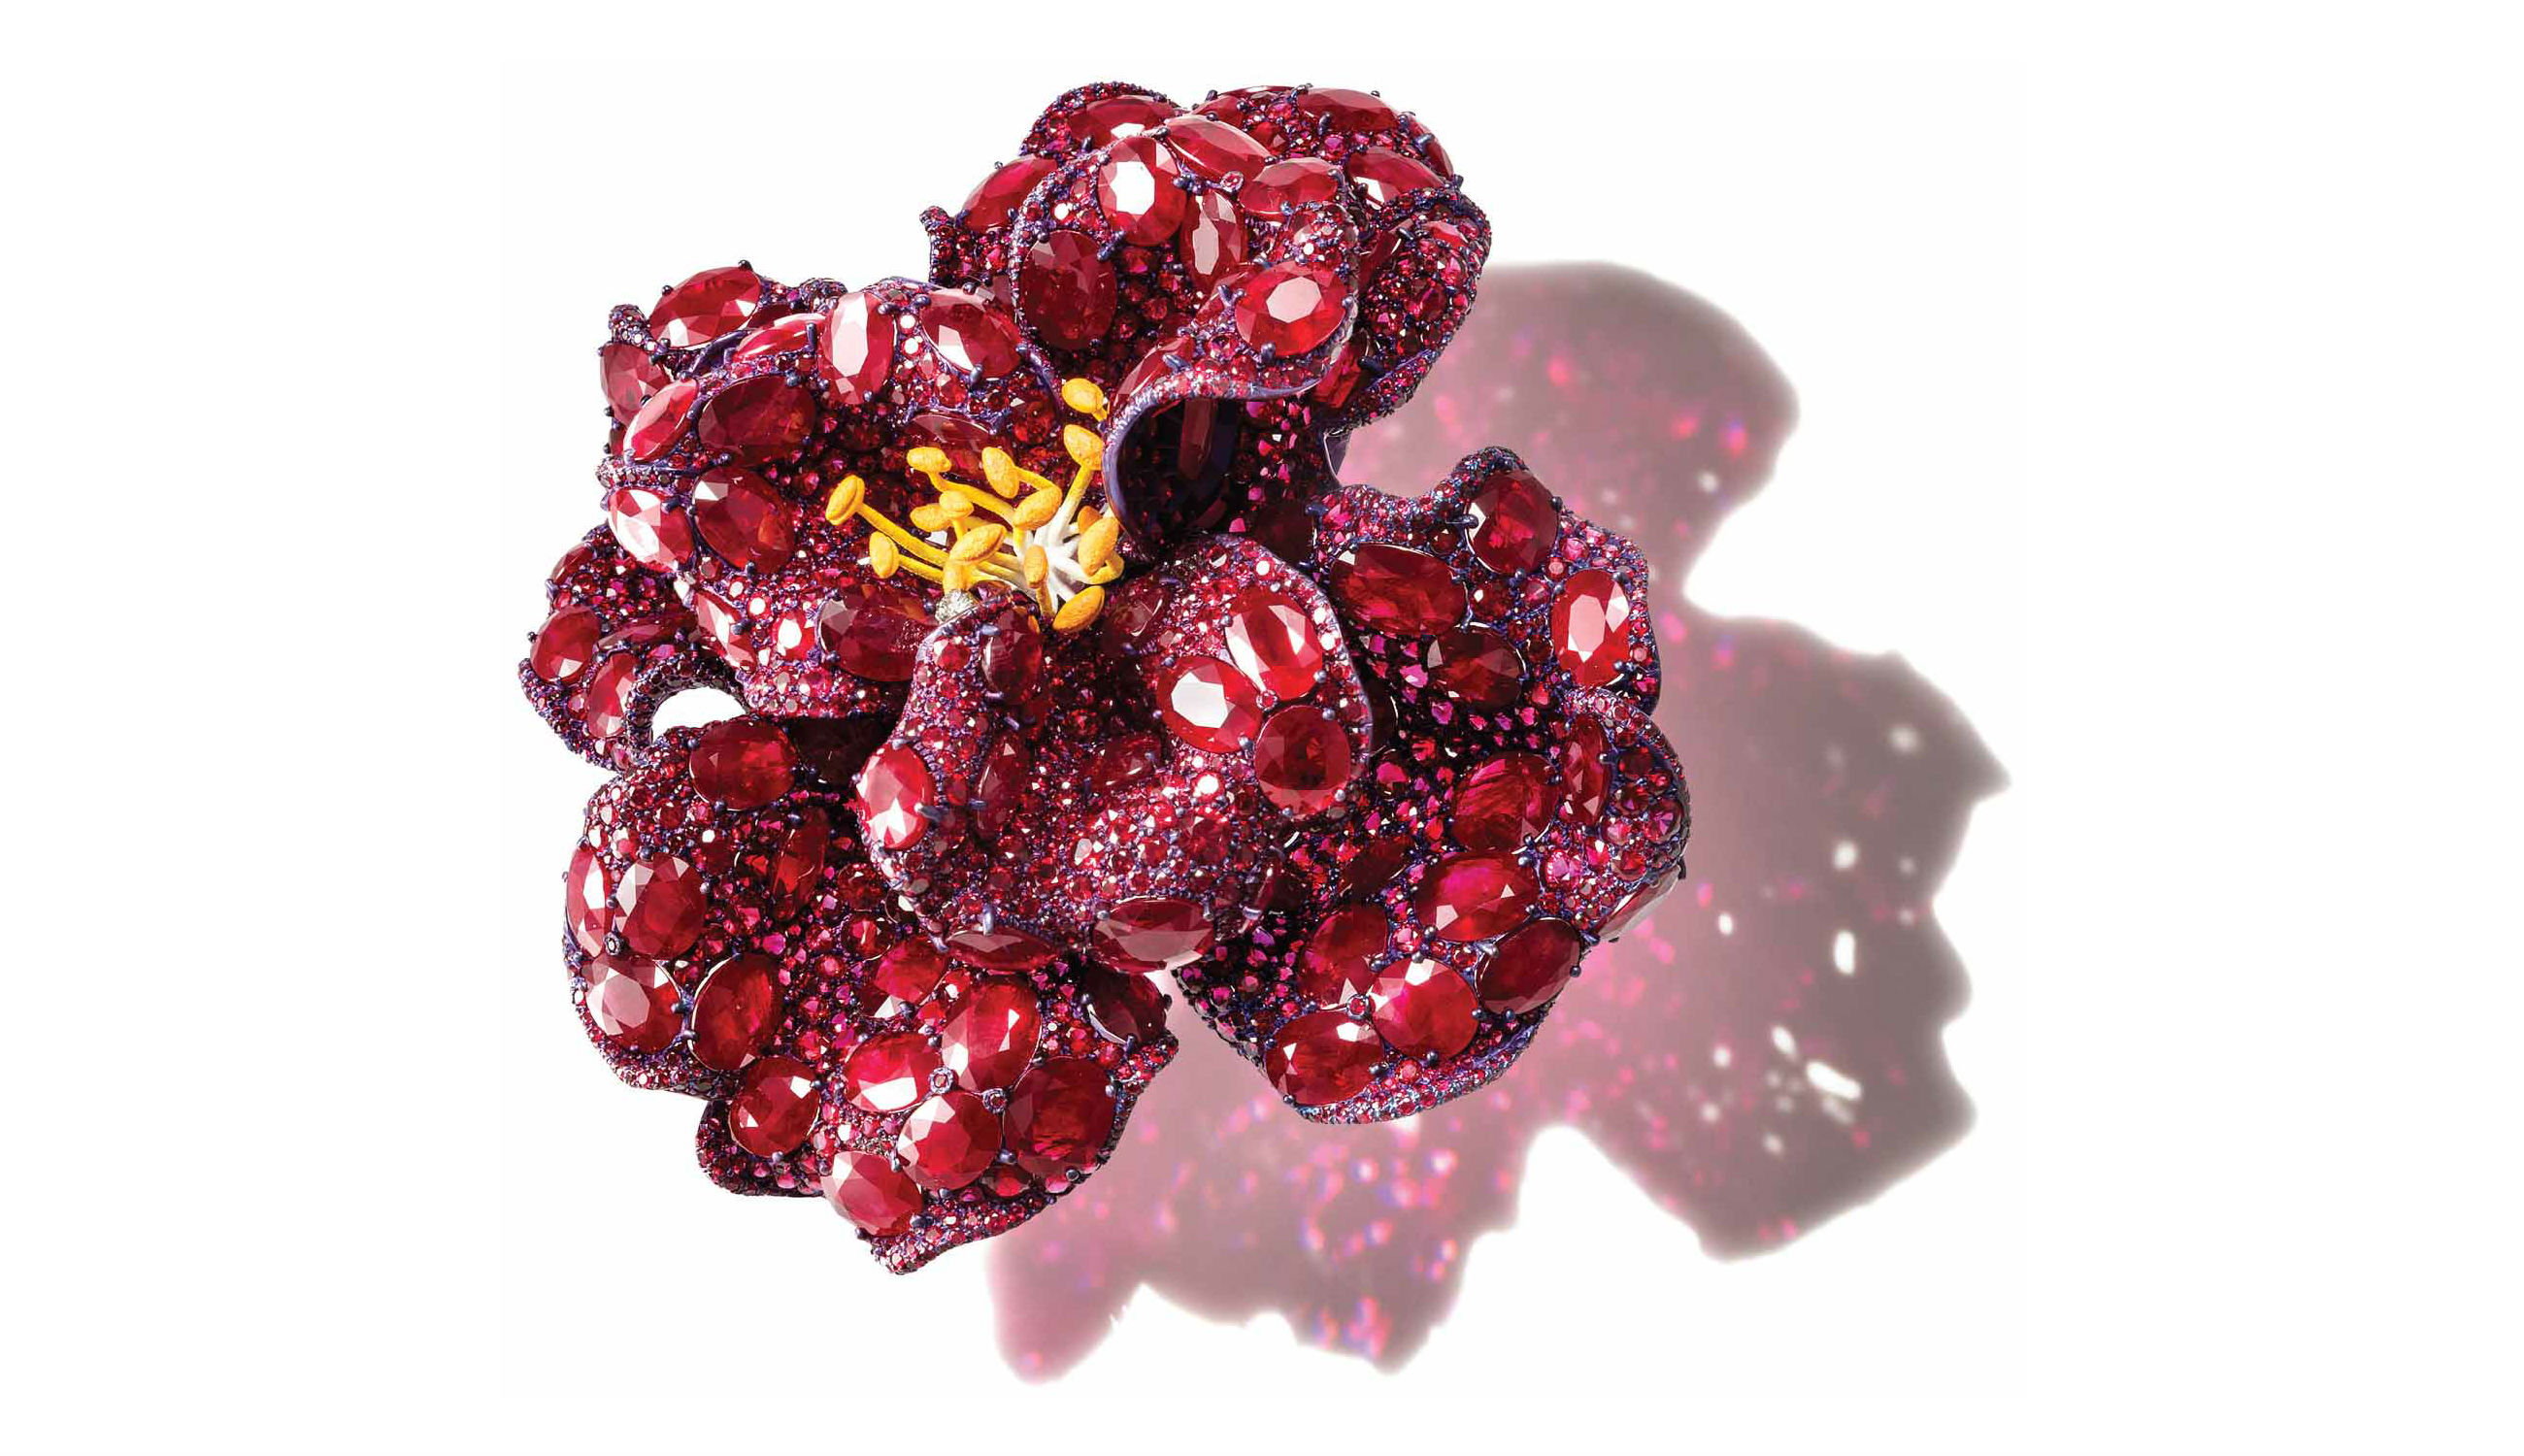 The Peony Brooch received an“Outstanding Object Award” at Masterpiece London 2018.